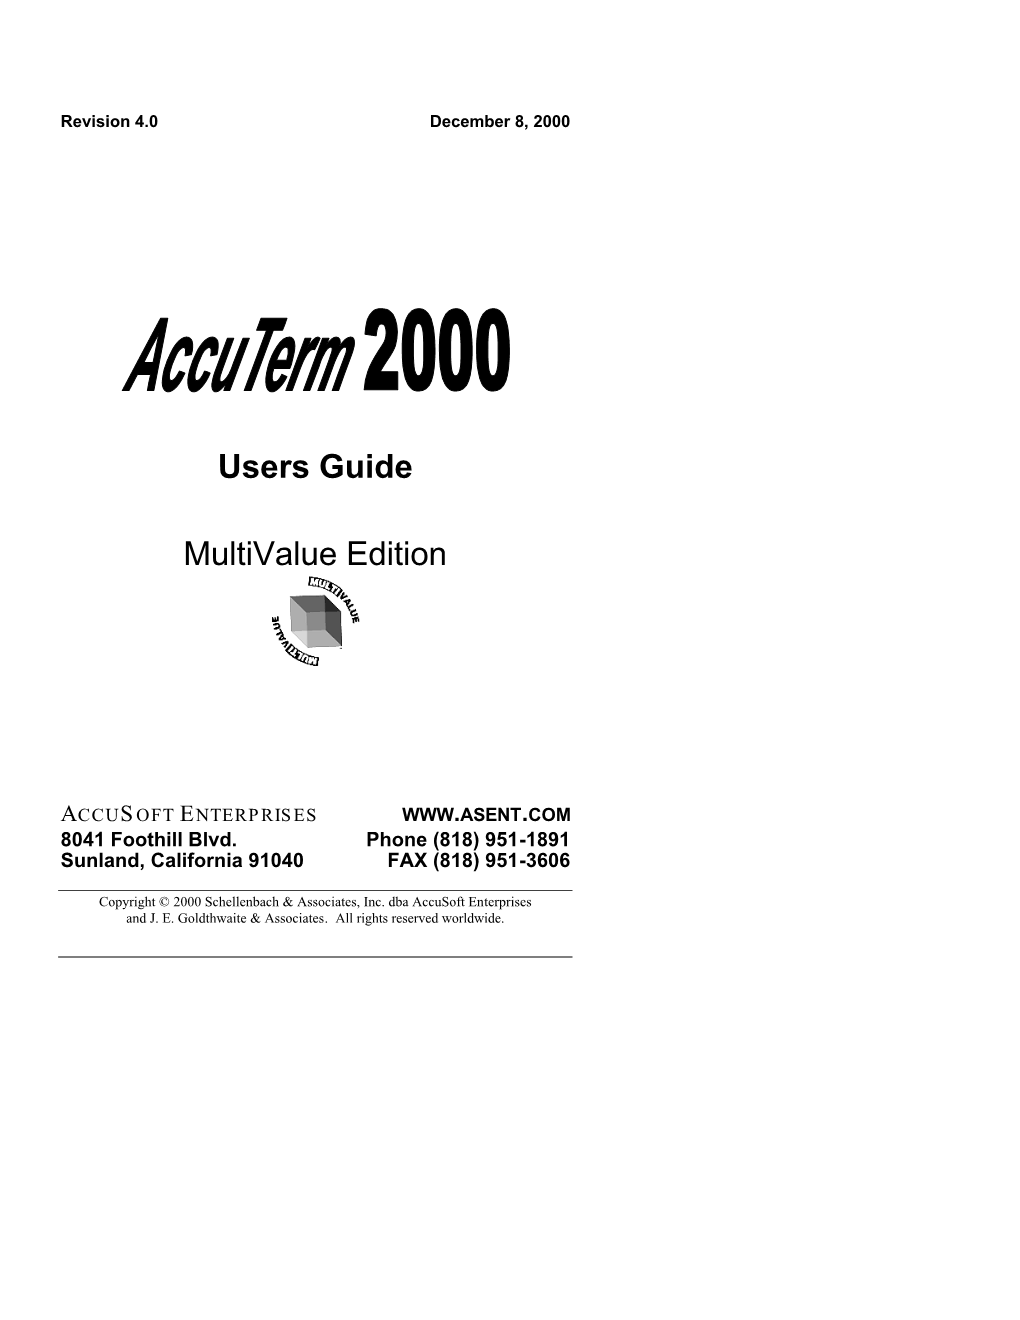 Accuterm 2000 Users Guide